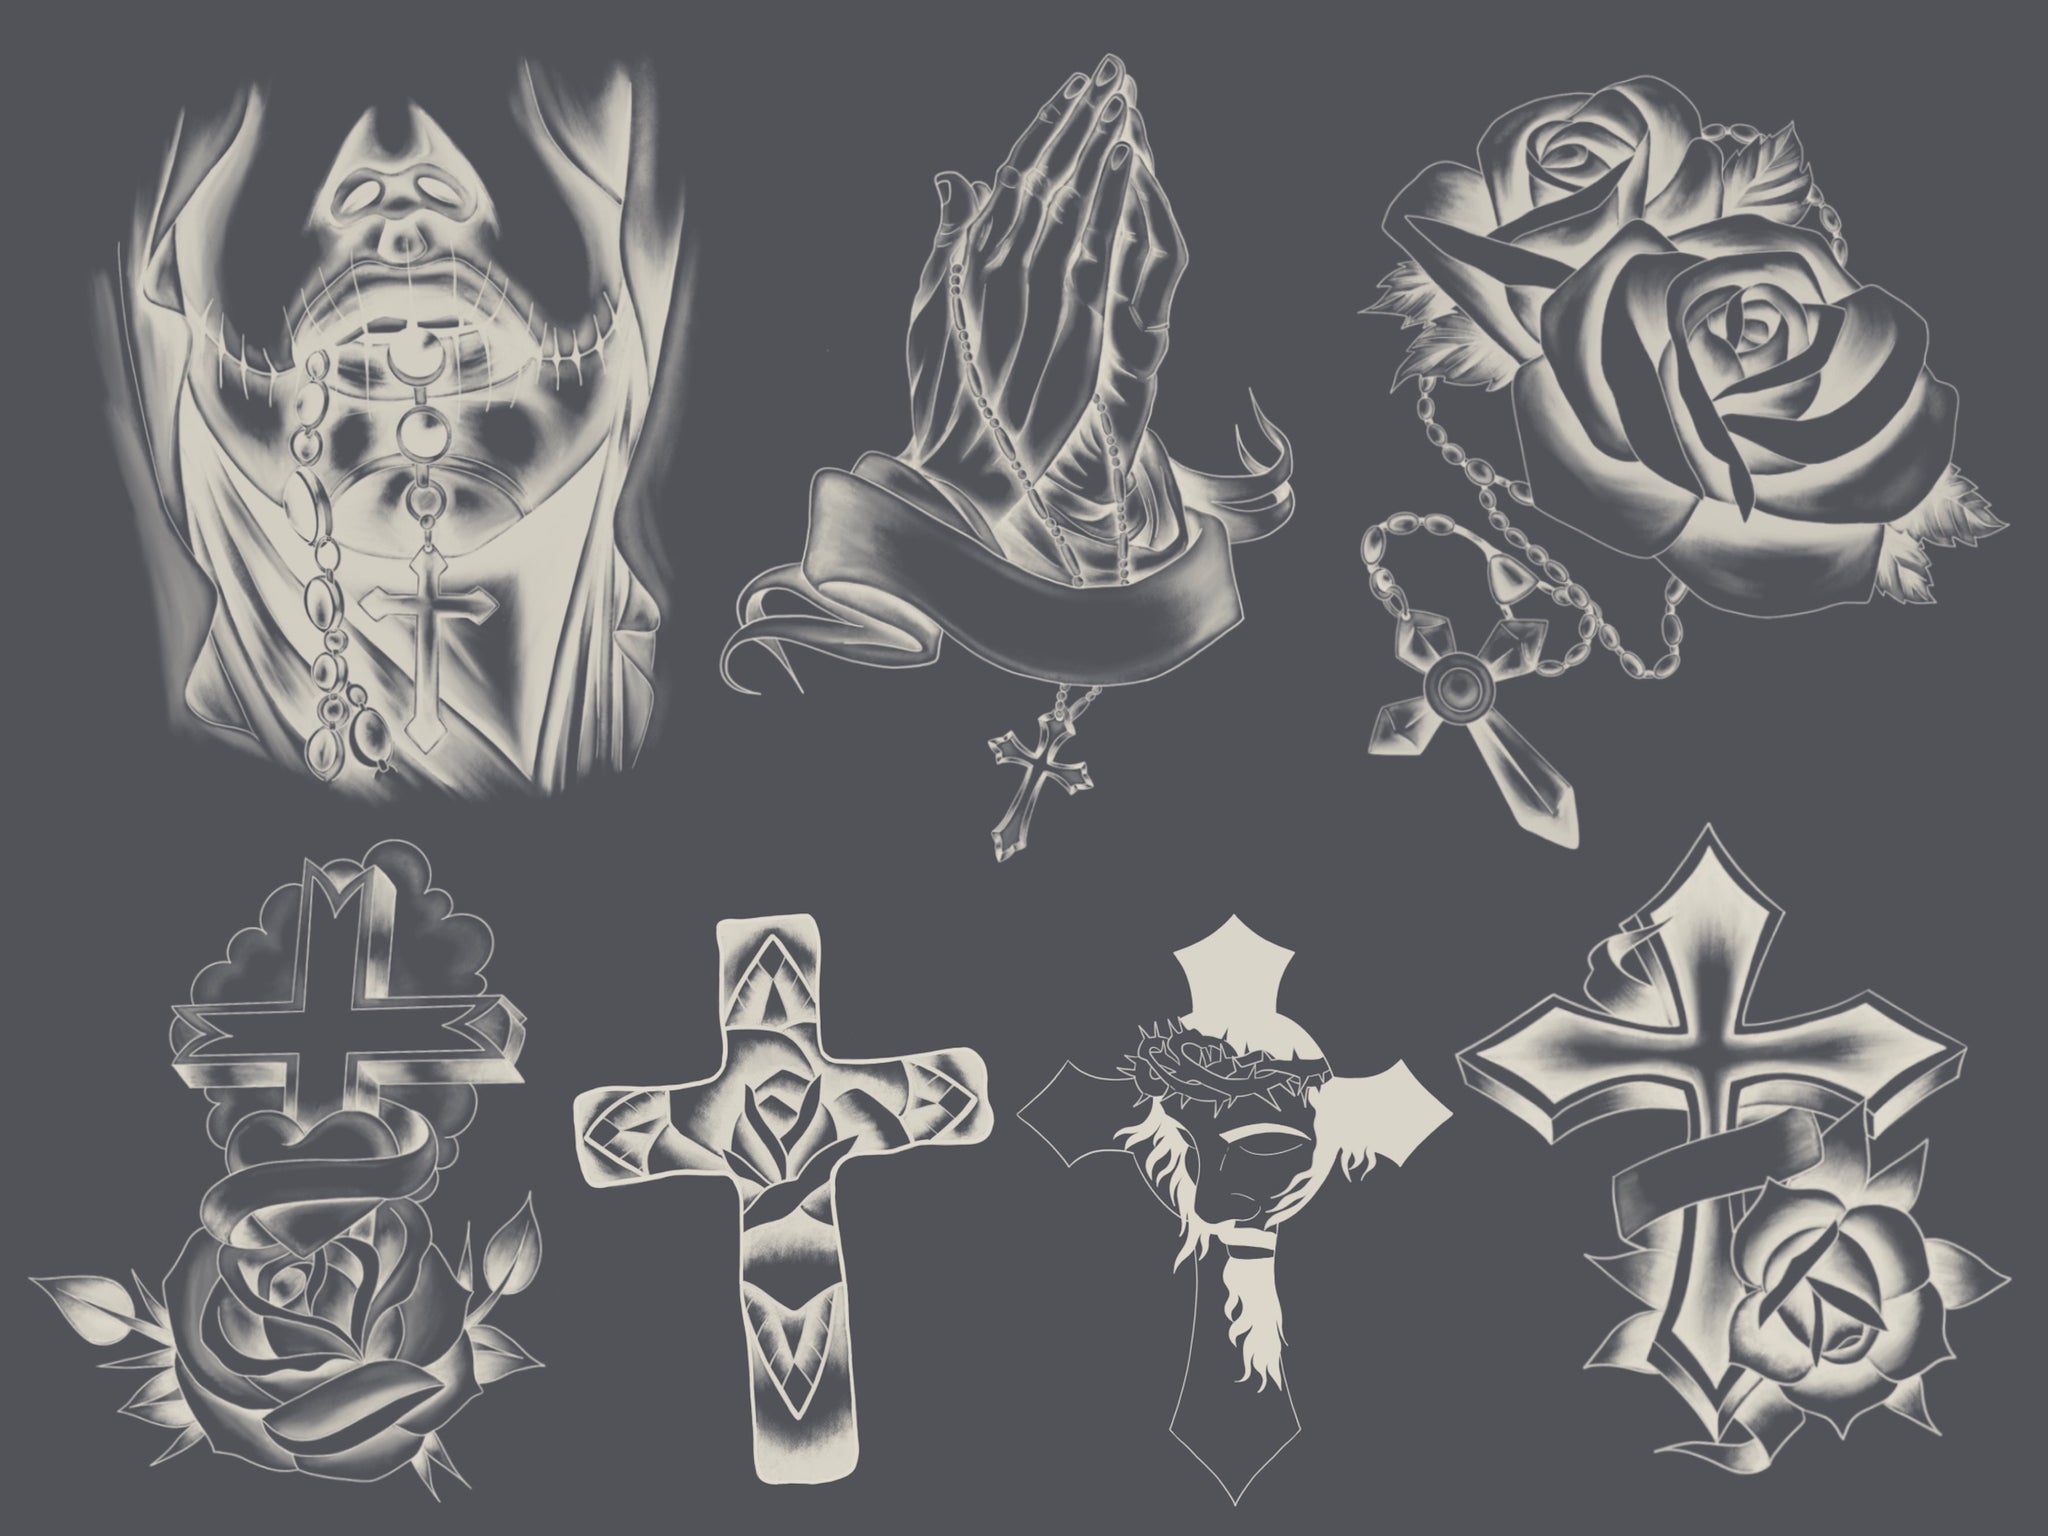 cross designs with rosary